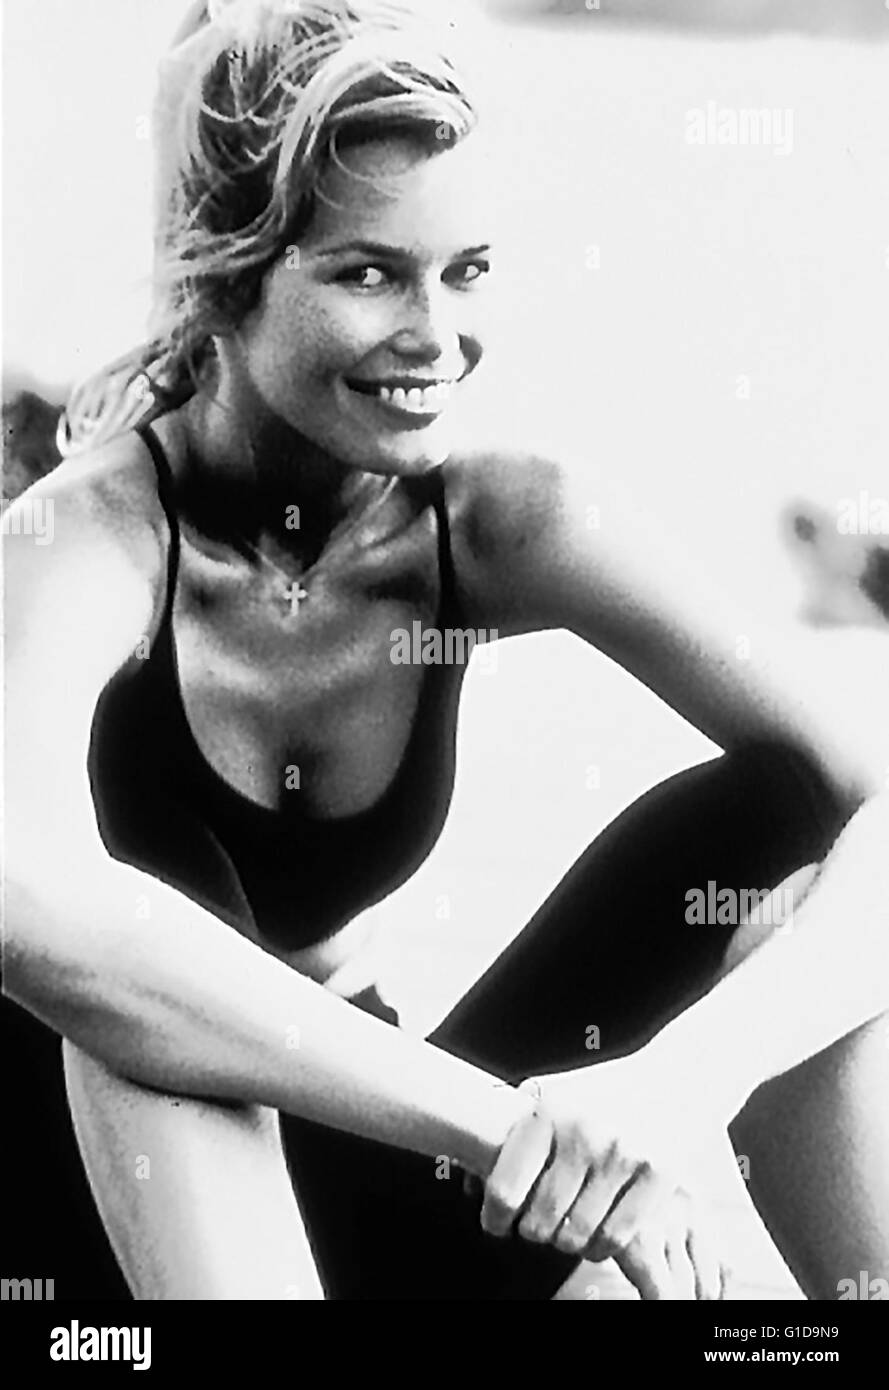 Claudia Schiffer - Perfectly Fit / Fitness / Model, Stock Photo